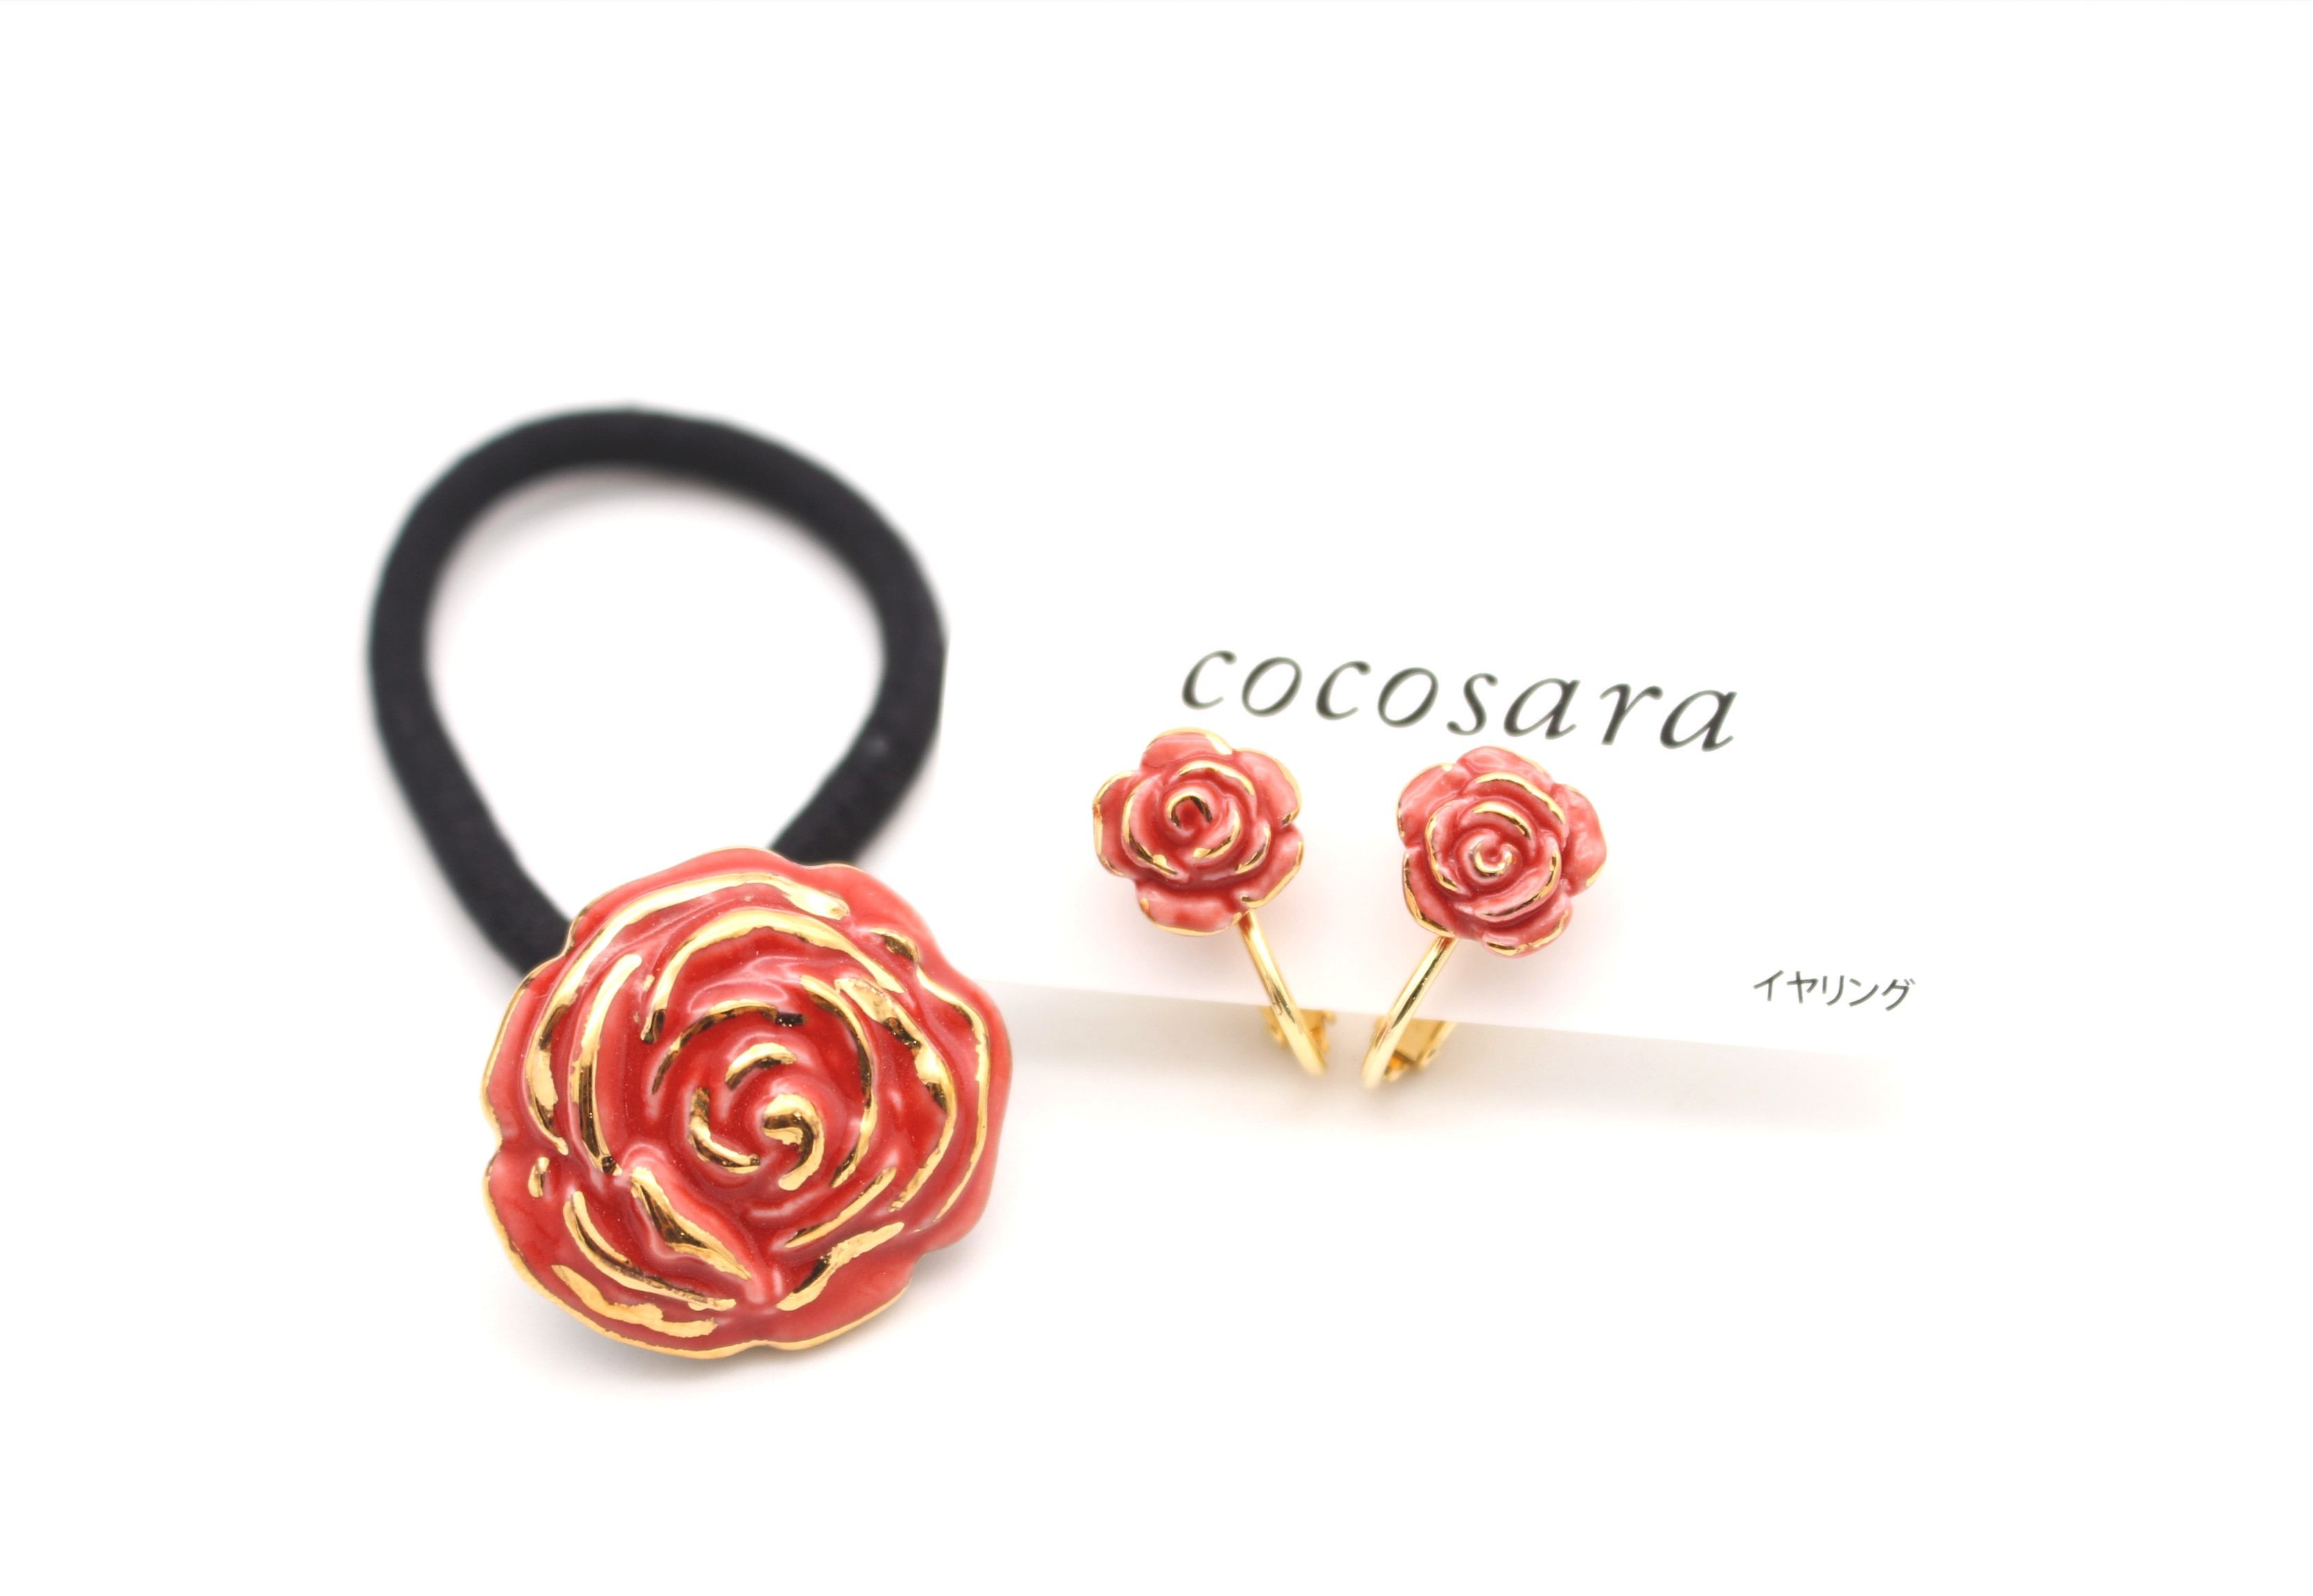 
A10-187 cocosara 有田焼 The longed-for red rose ヘアゴム＆イヤリング
